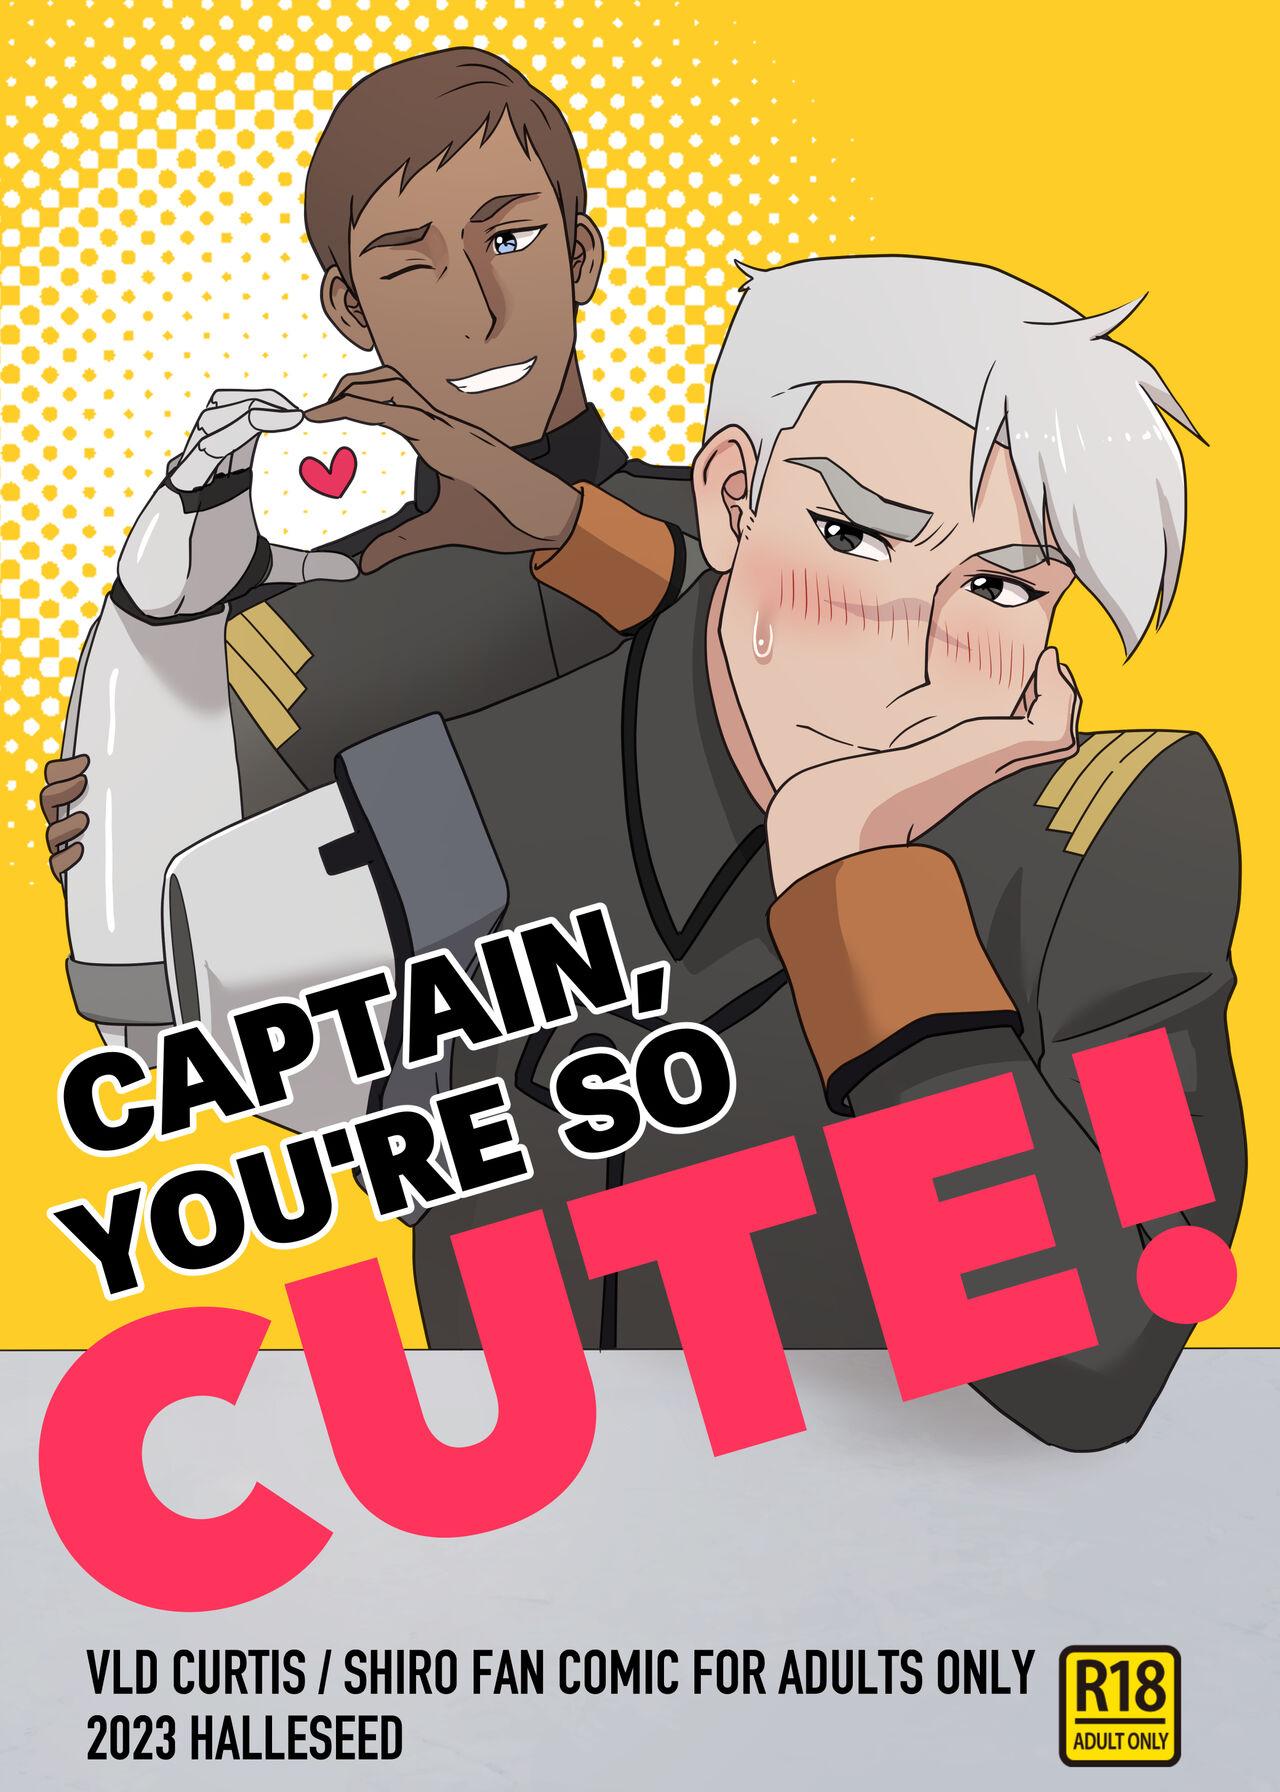 Public Nudity Captain, You’re so CUTE! - Voltron American - Page 1